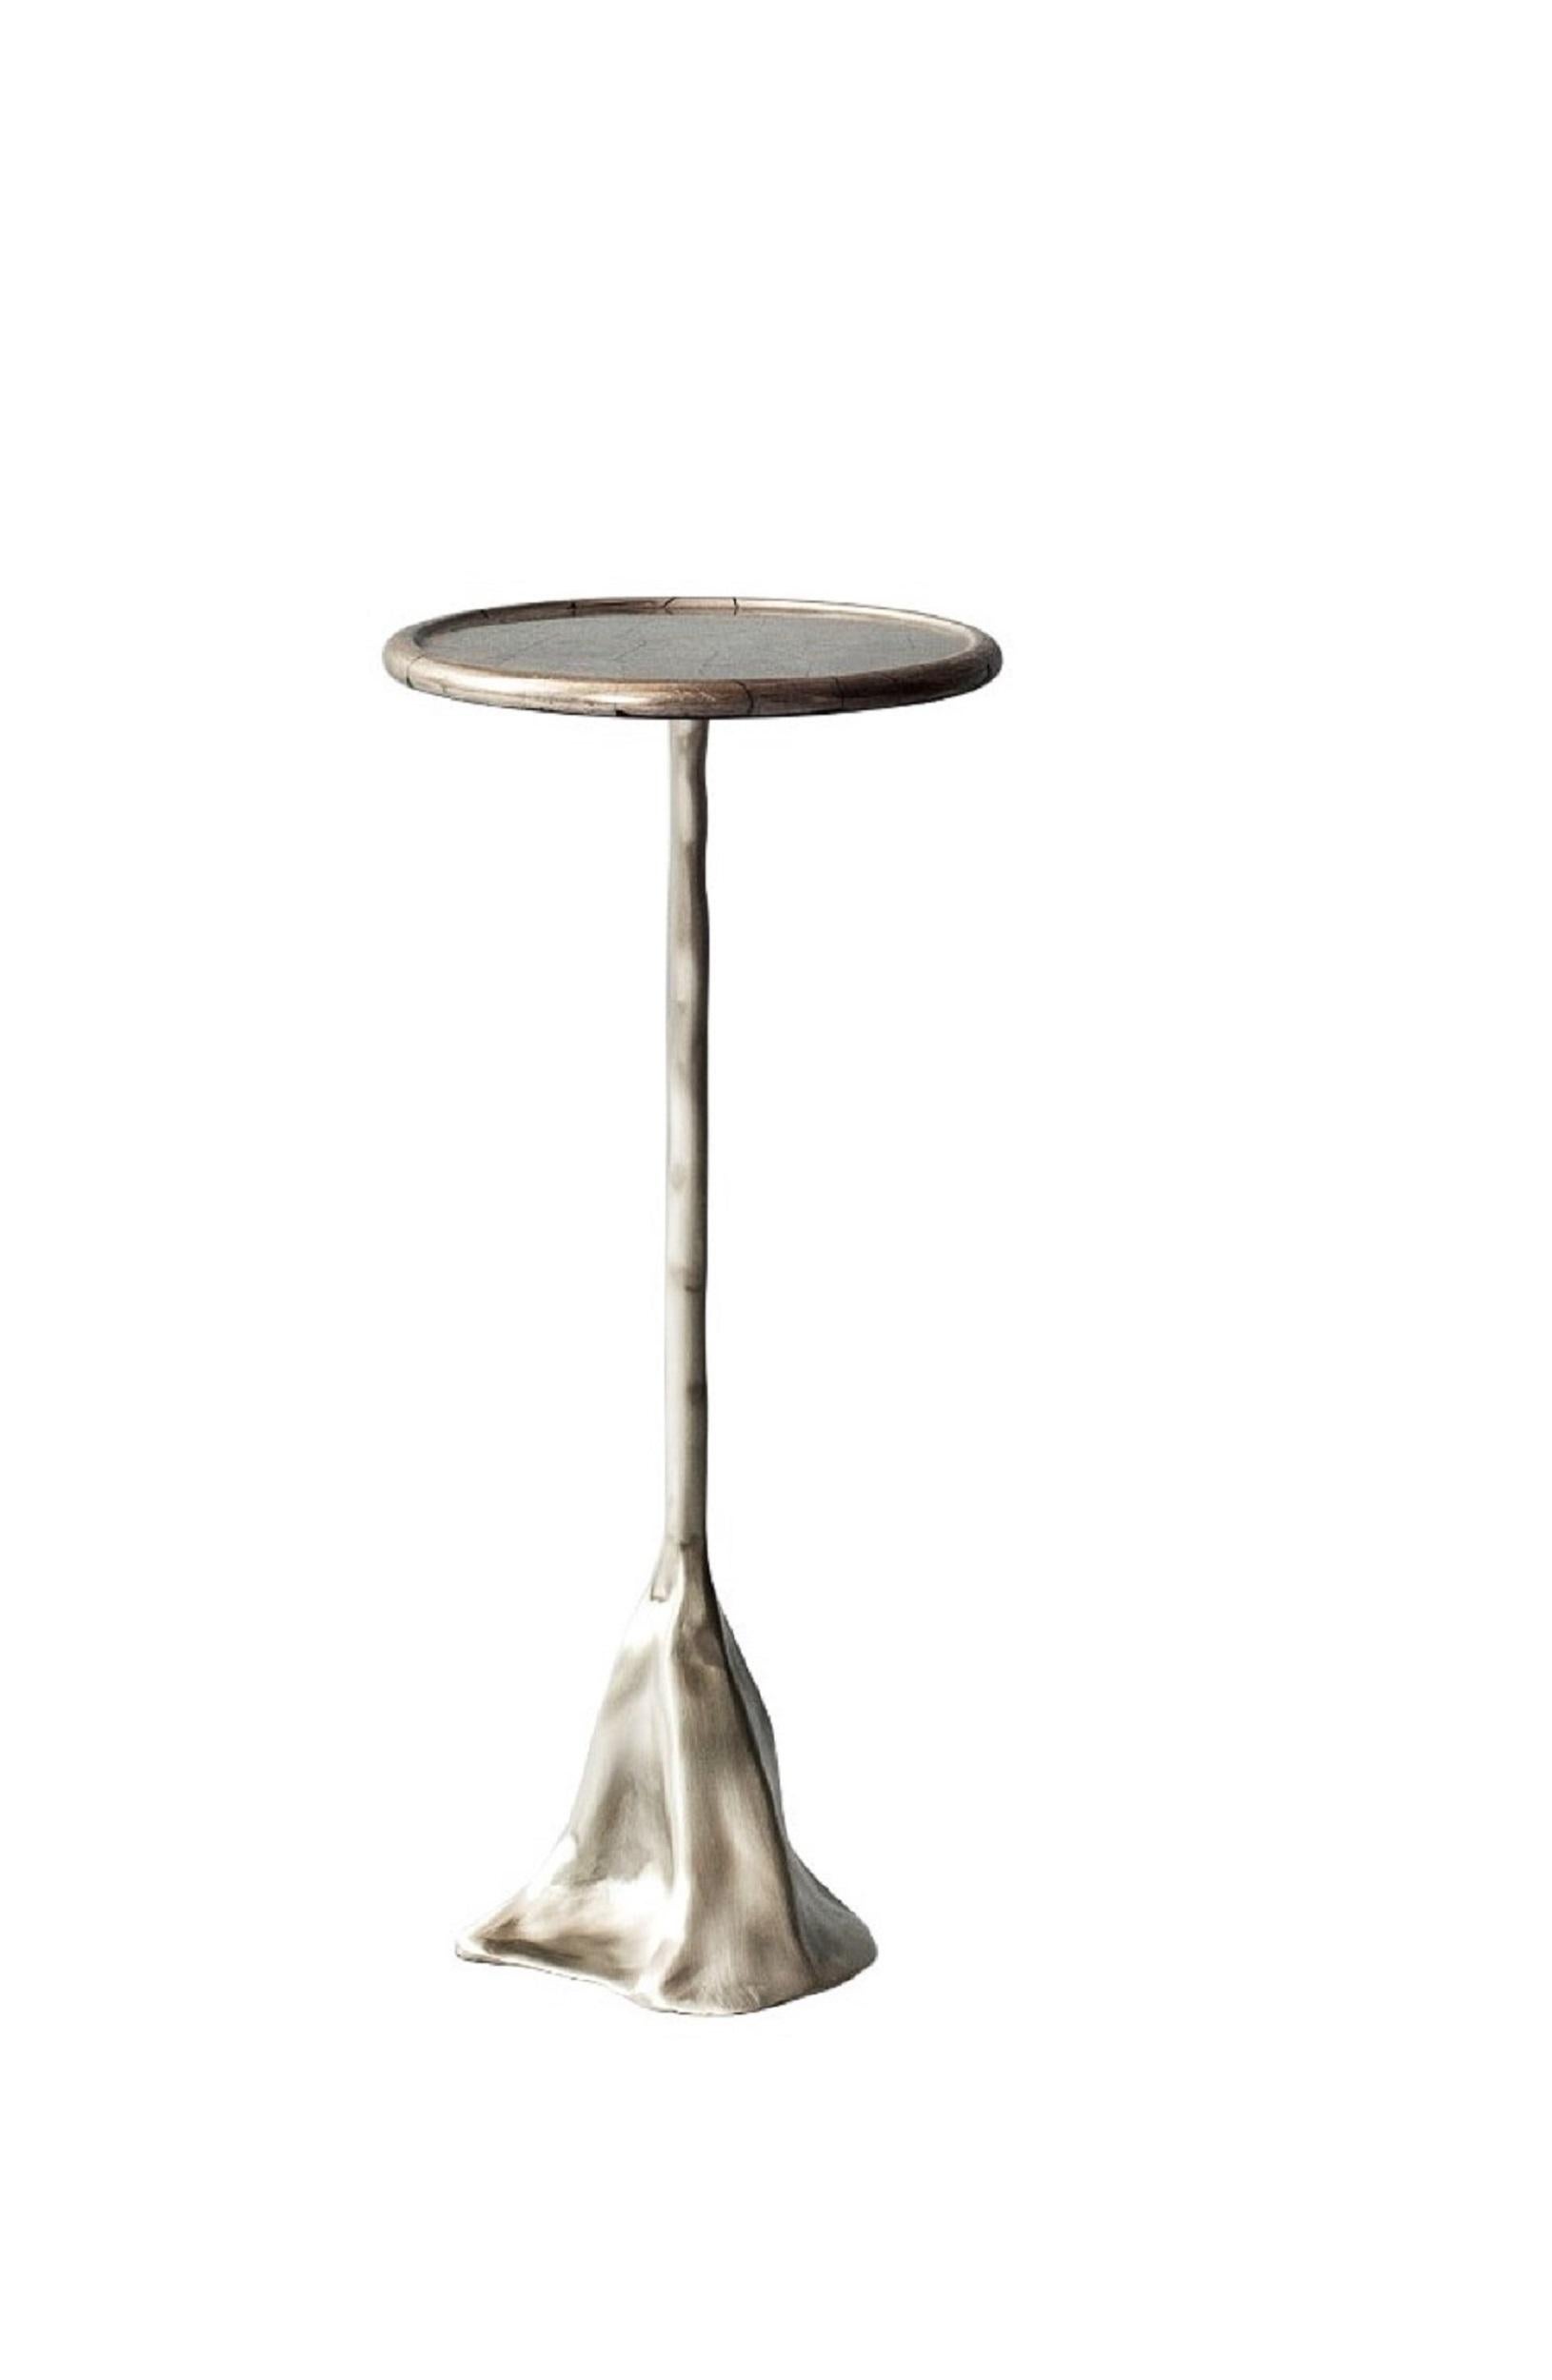 Tana side table by DeMuro Das
Dimensions: 25 x H 55.6 cm
Materials: Pyrite (Silver), polished (Random)
Solid Nickle silver, satin

Dimensions and finishes can be customized.

DeMuro Das is an international design firm and the aesthetic and cultural